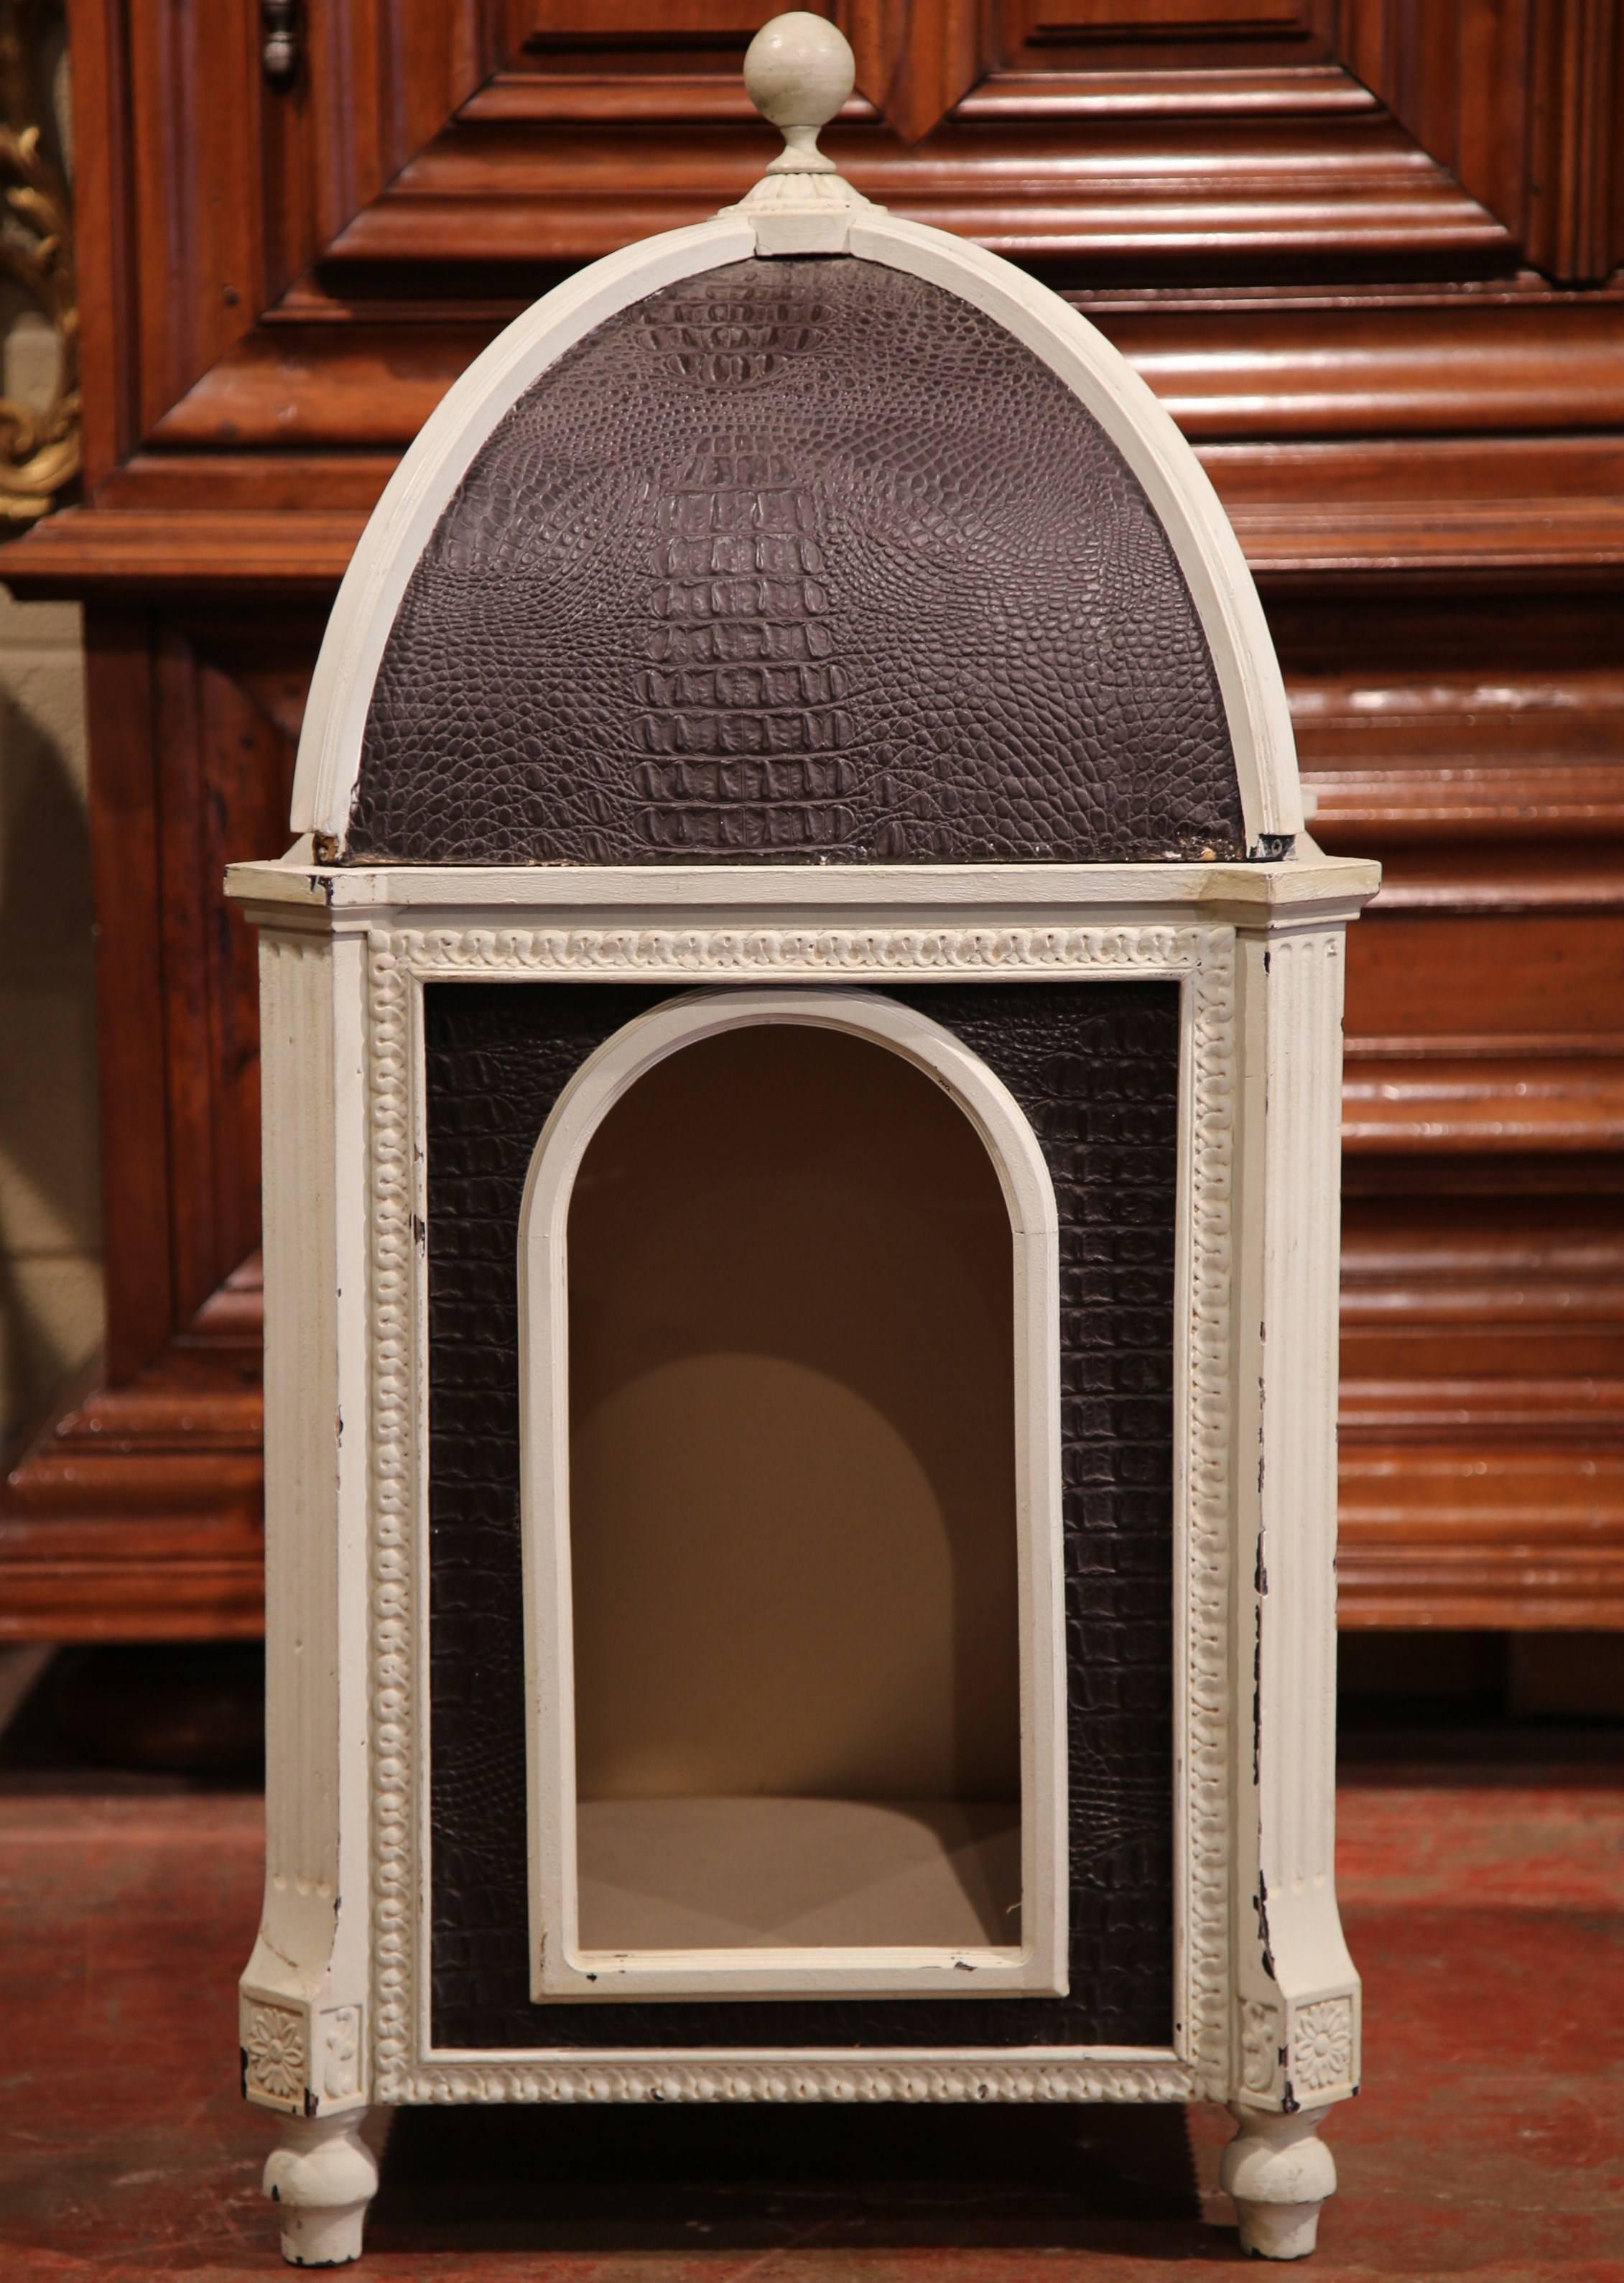 Treat your dog to something special with this Classic, one of a kind dog house from France. The carved frame dog bed with dome top stands on four small feet, it is hand painted white and upholstered with brown leather that imitates crocodile hide.